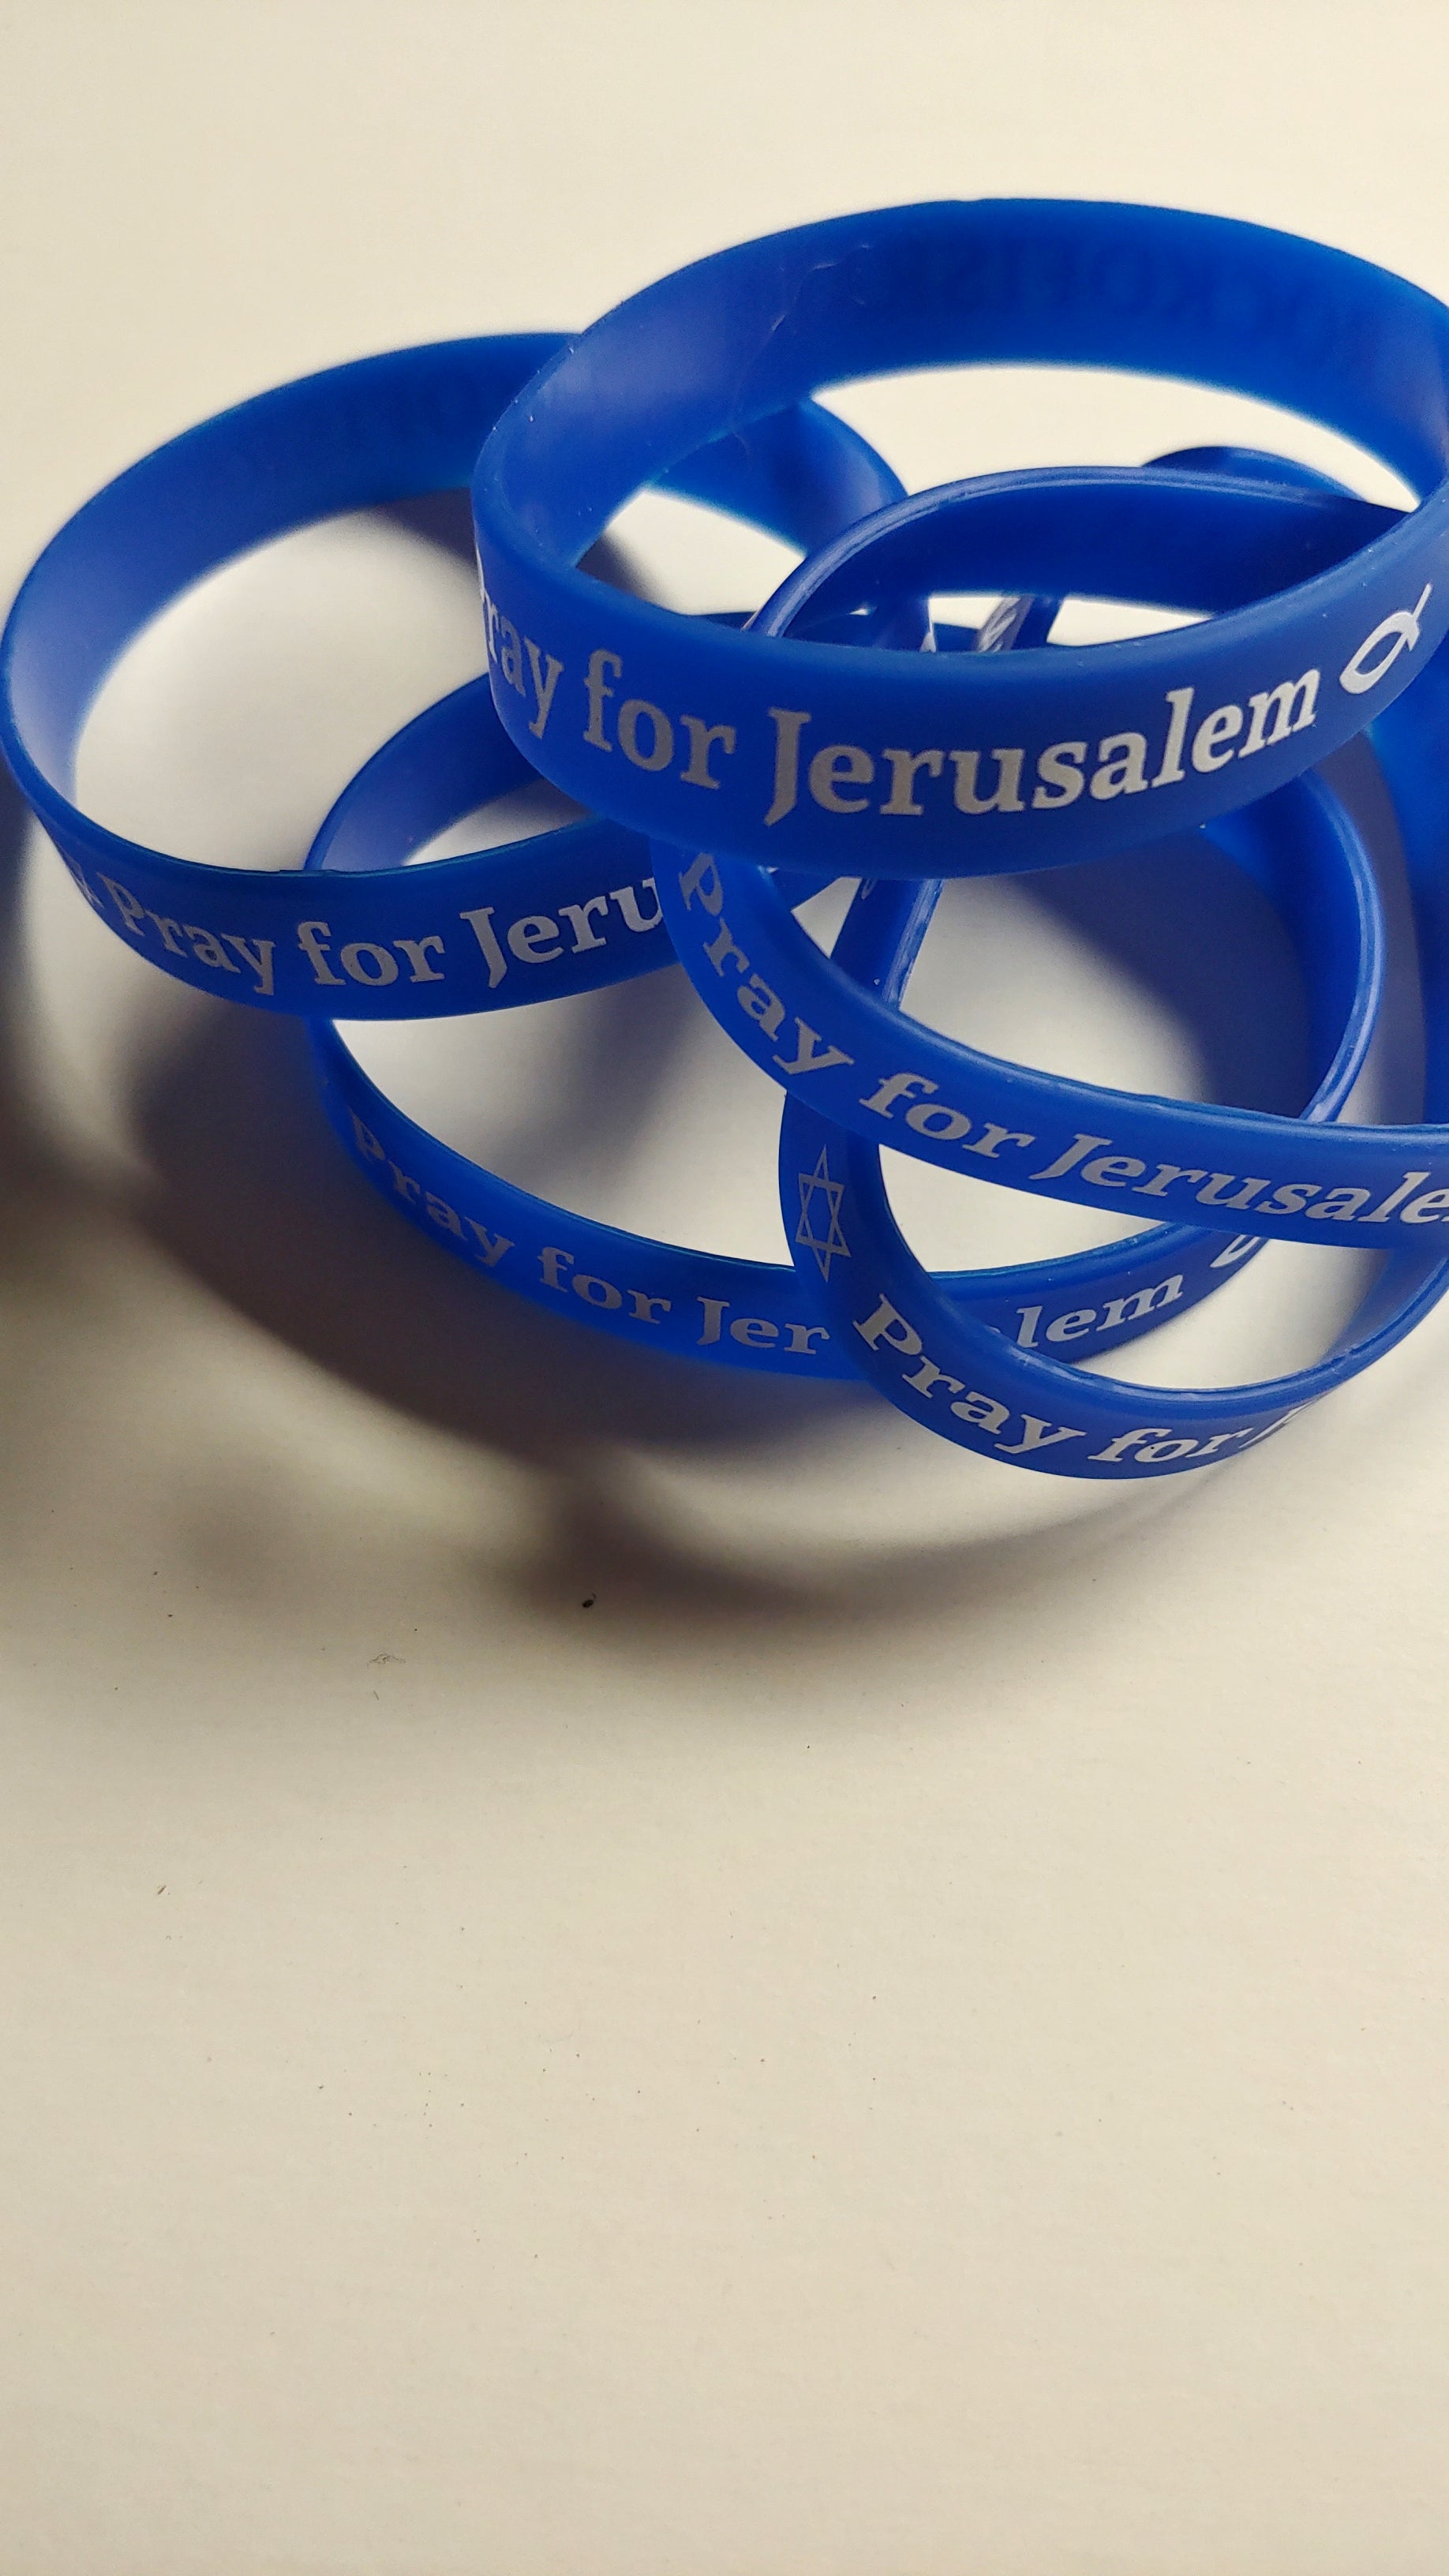 Pray for Jerusalem / Pray for Israel rubber wristband – Rock of Israel Store